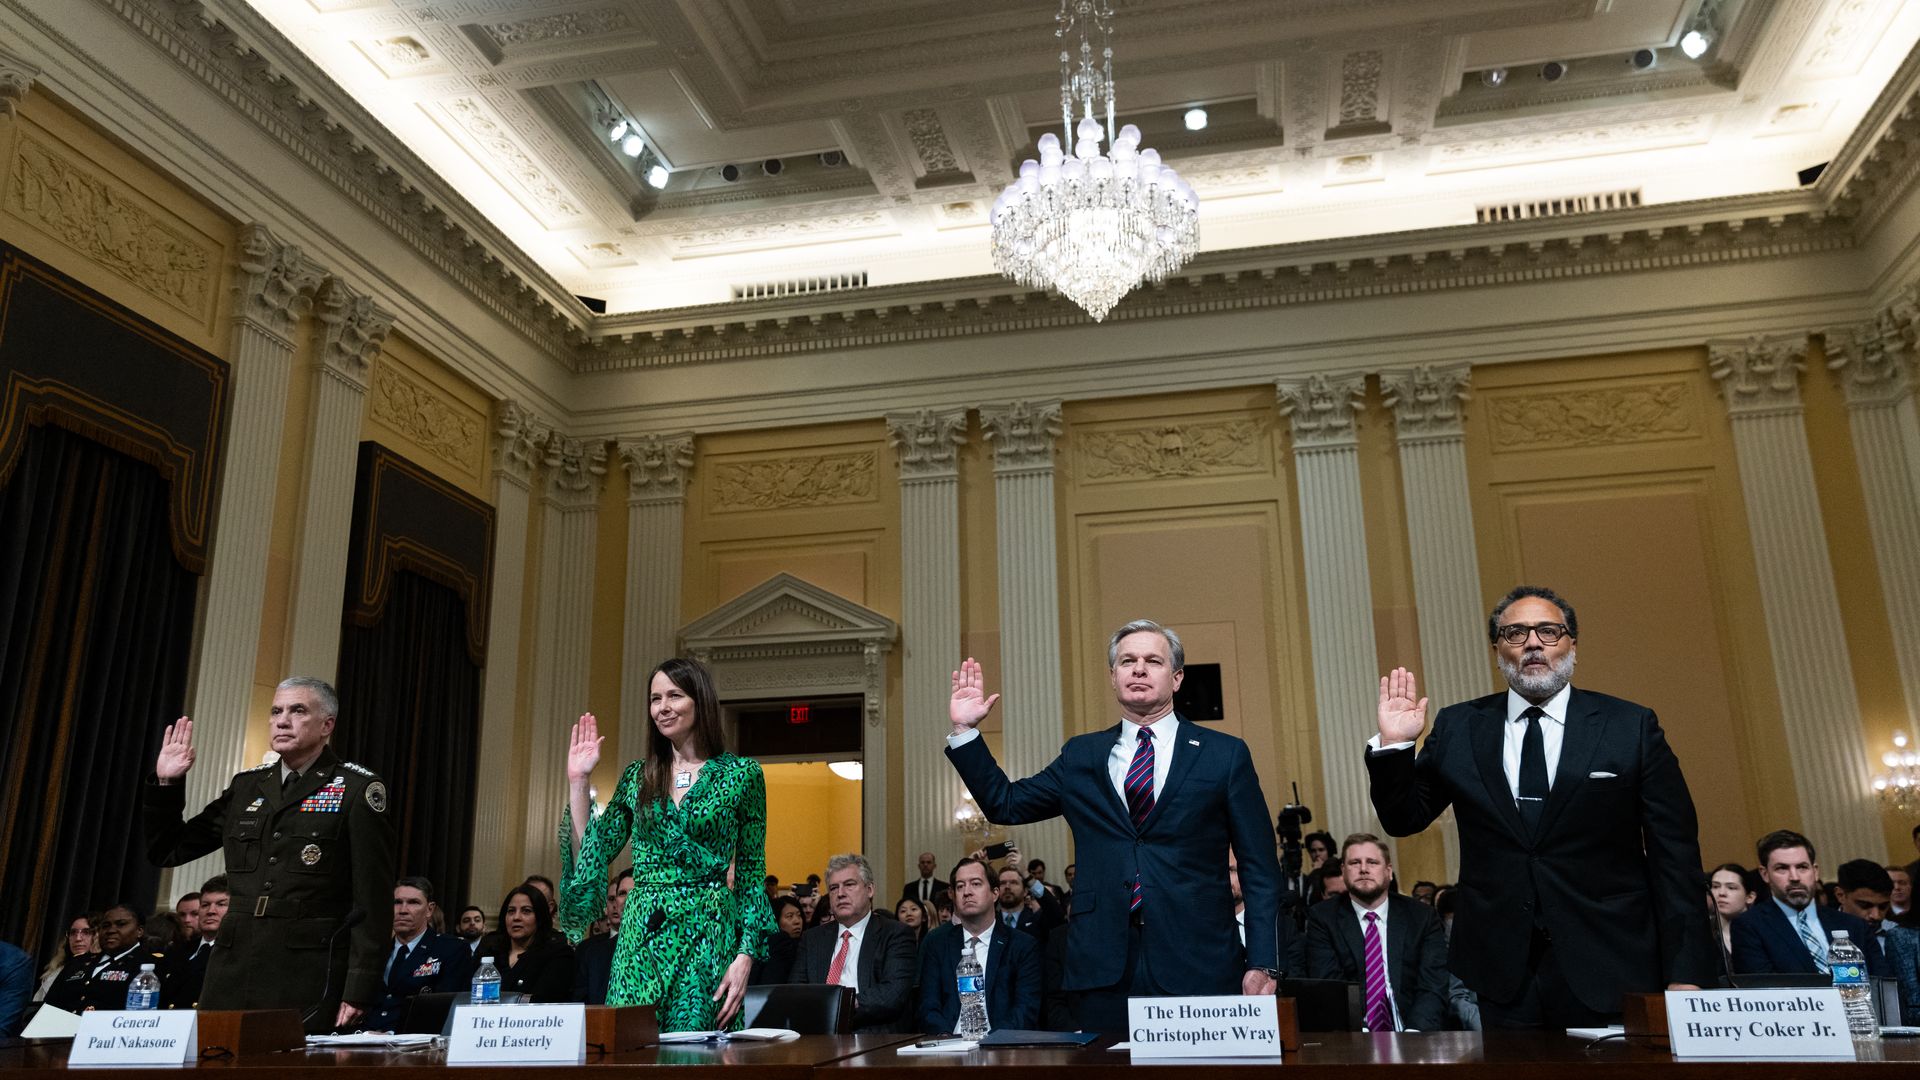 US Cyber Commander, General Paul Nakasone; Director Cybersecurity and Infrastructure Security Agency, Jen Easterly; FBI Director, Christopher Wray; and National Cyber Director Harry Coker Jr., are sworn in during a Congressional full committee hearing